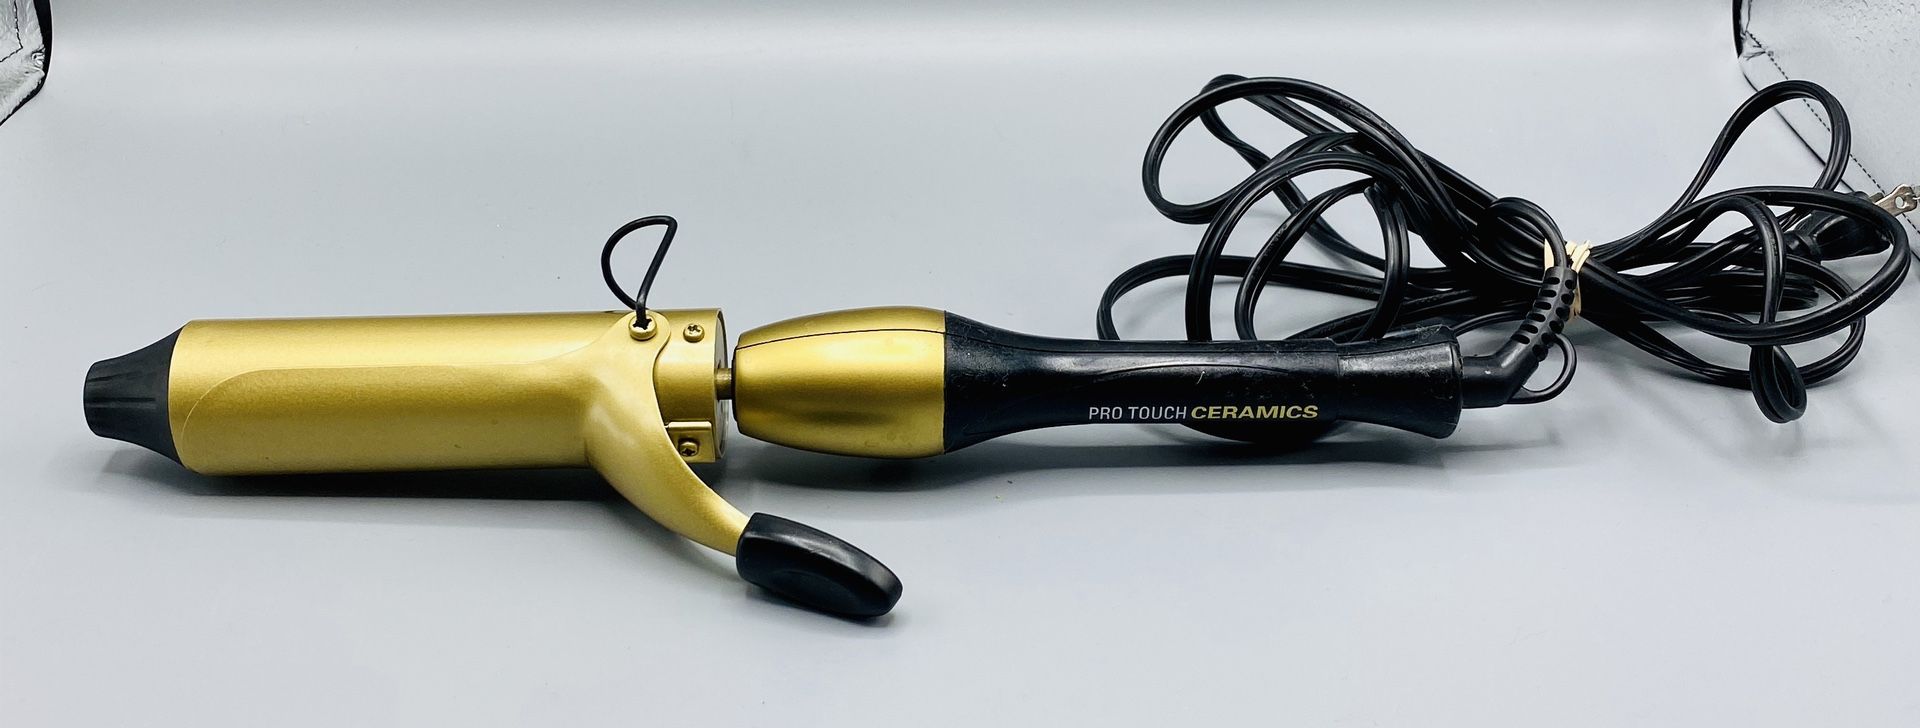 Belson Pro Touch Ceramic Curler